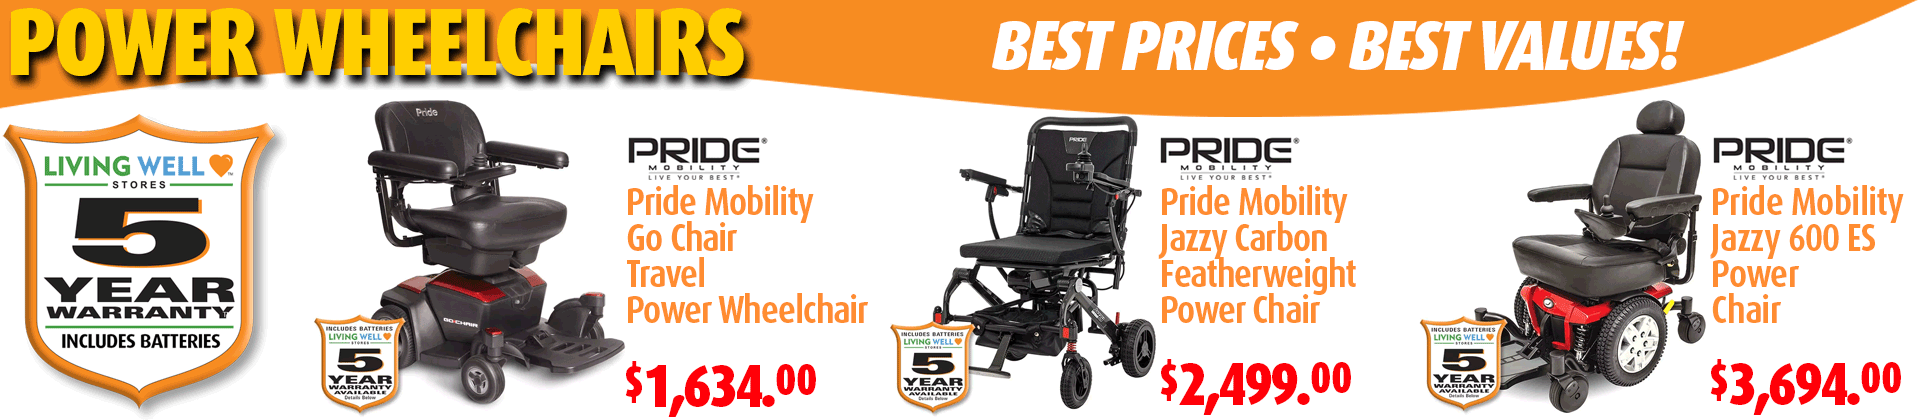 Living Well Stores: The Best Power Wheelchairs with Exclusive Warranties